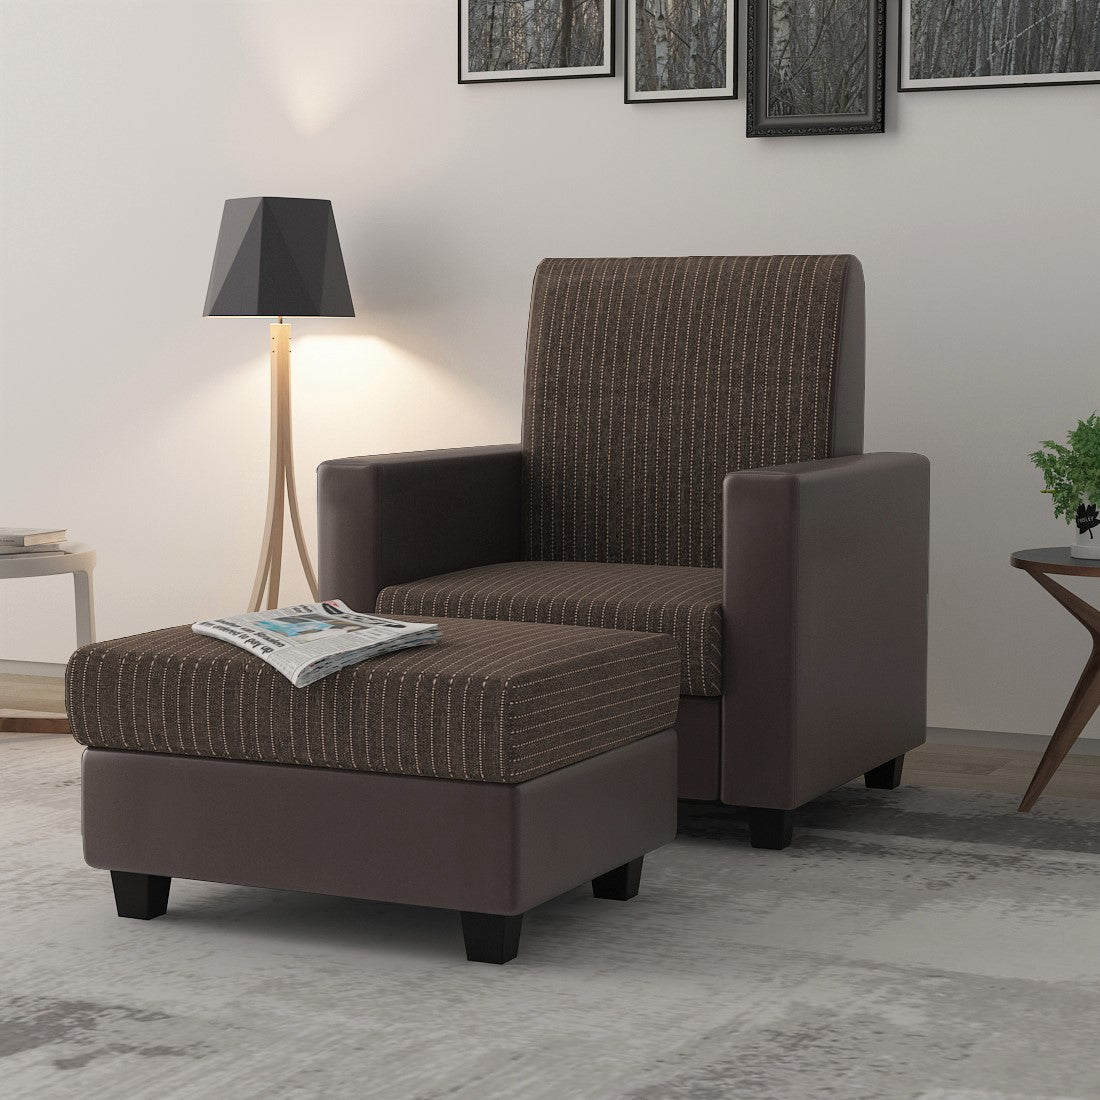 Baley Fabric 1 Seater Ottoman Chair In Lama Brown Colour